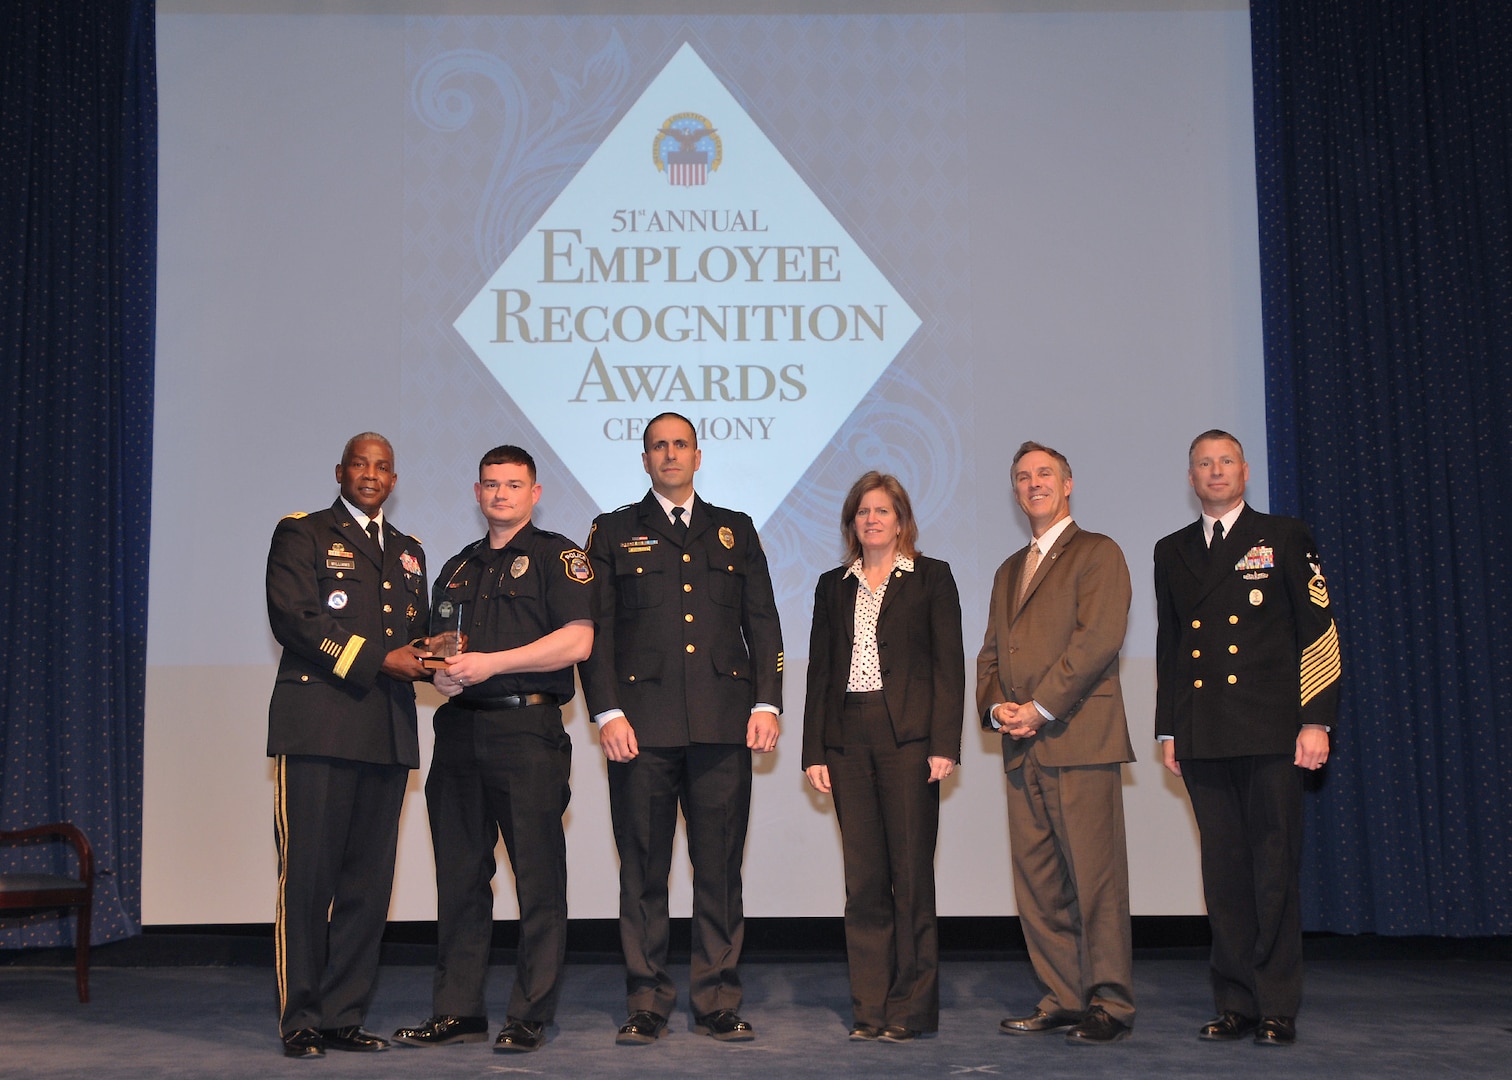 DLA Installation Management Operations Susquehanna and San Joaquin Police Department team members recognized for excellence at Agency’s 51st award ceremony